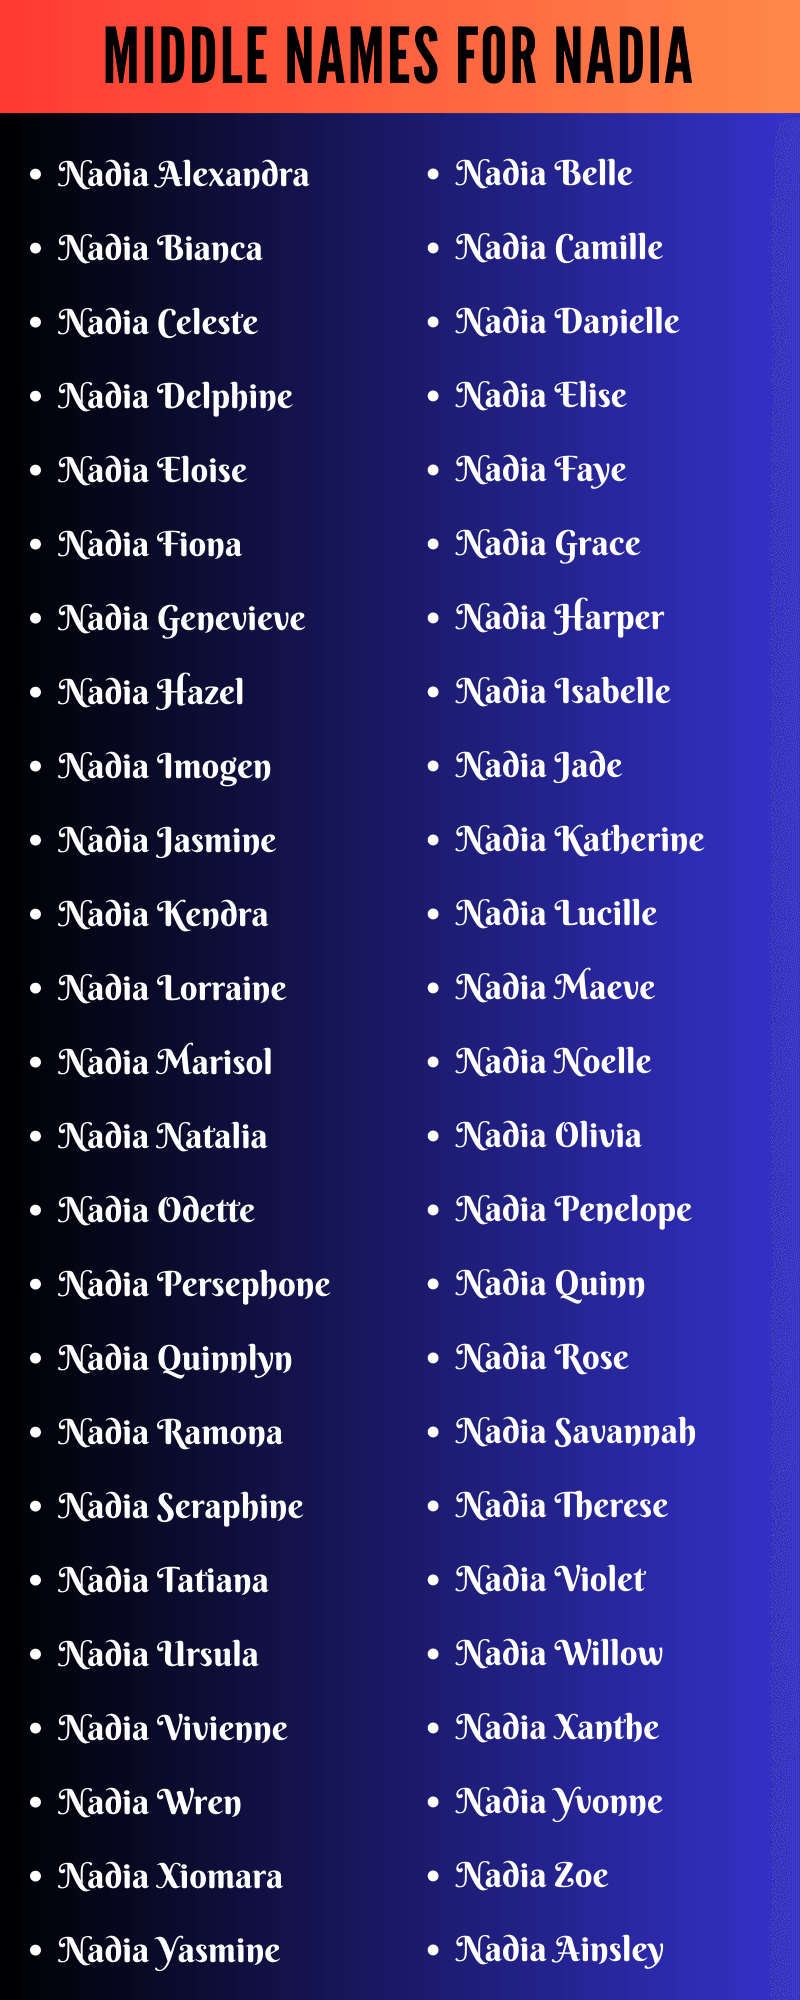 Middle Names For Nadia